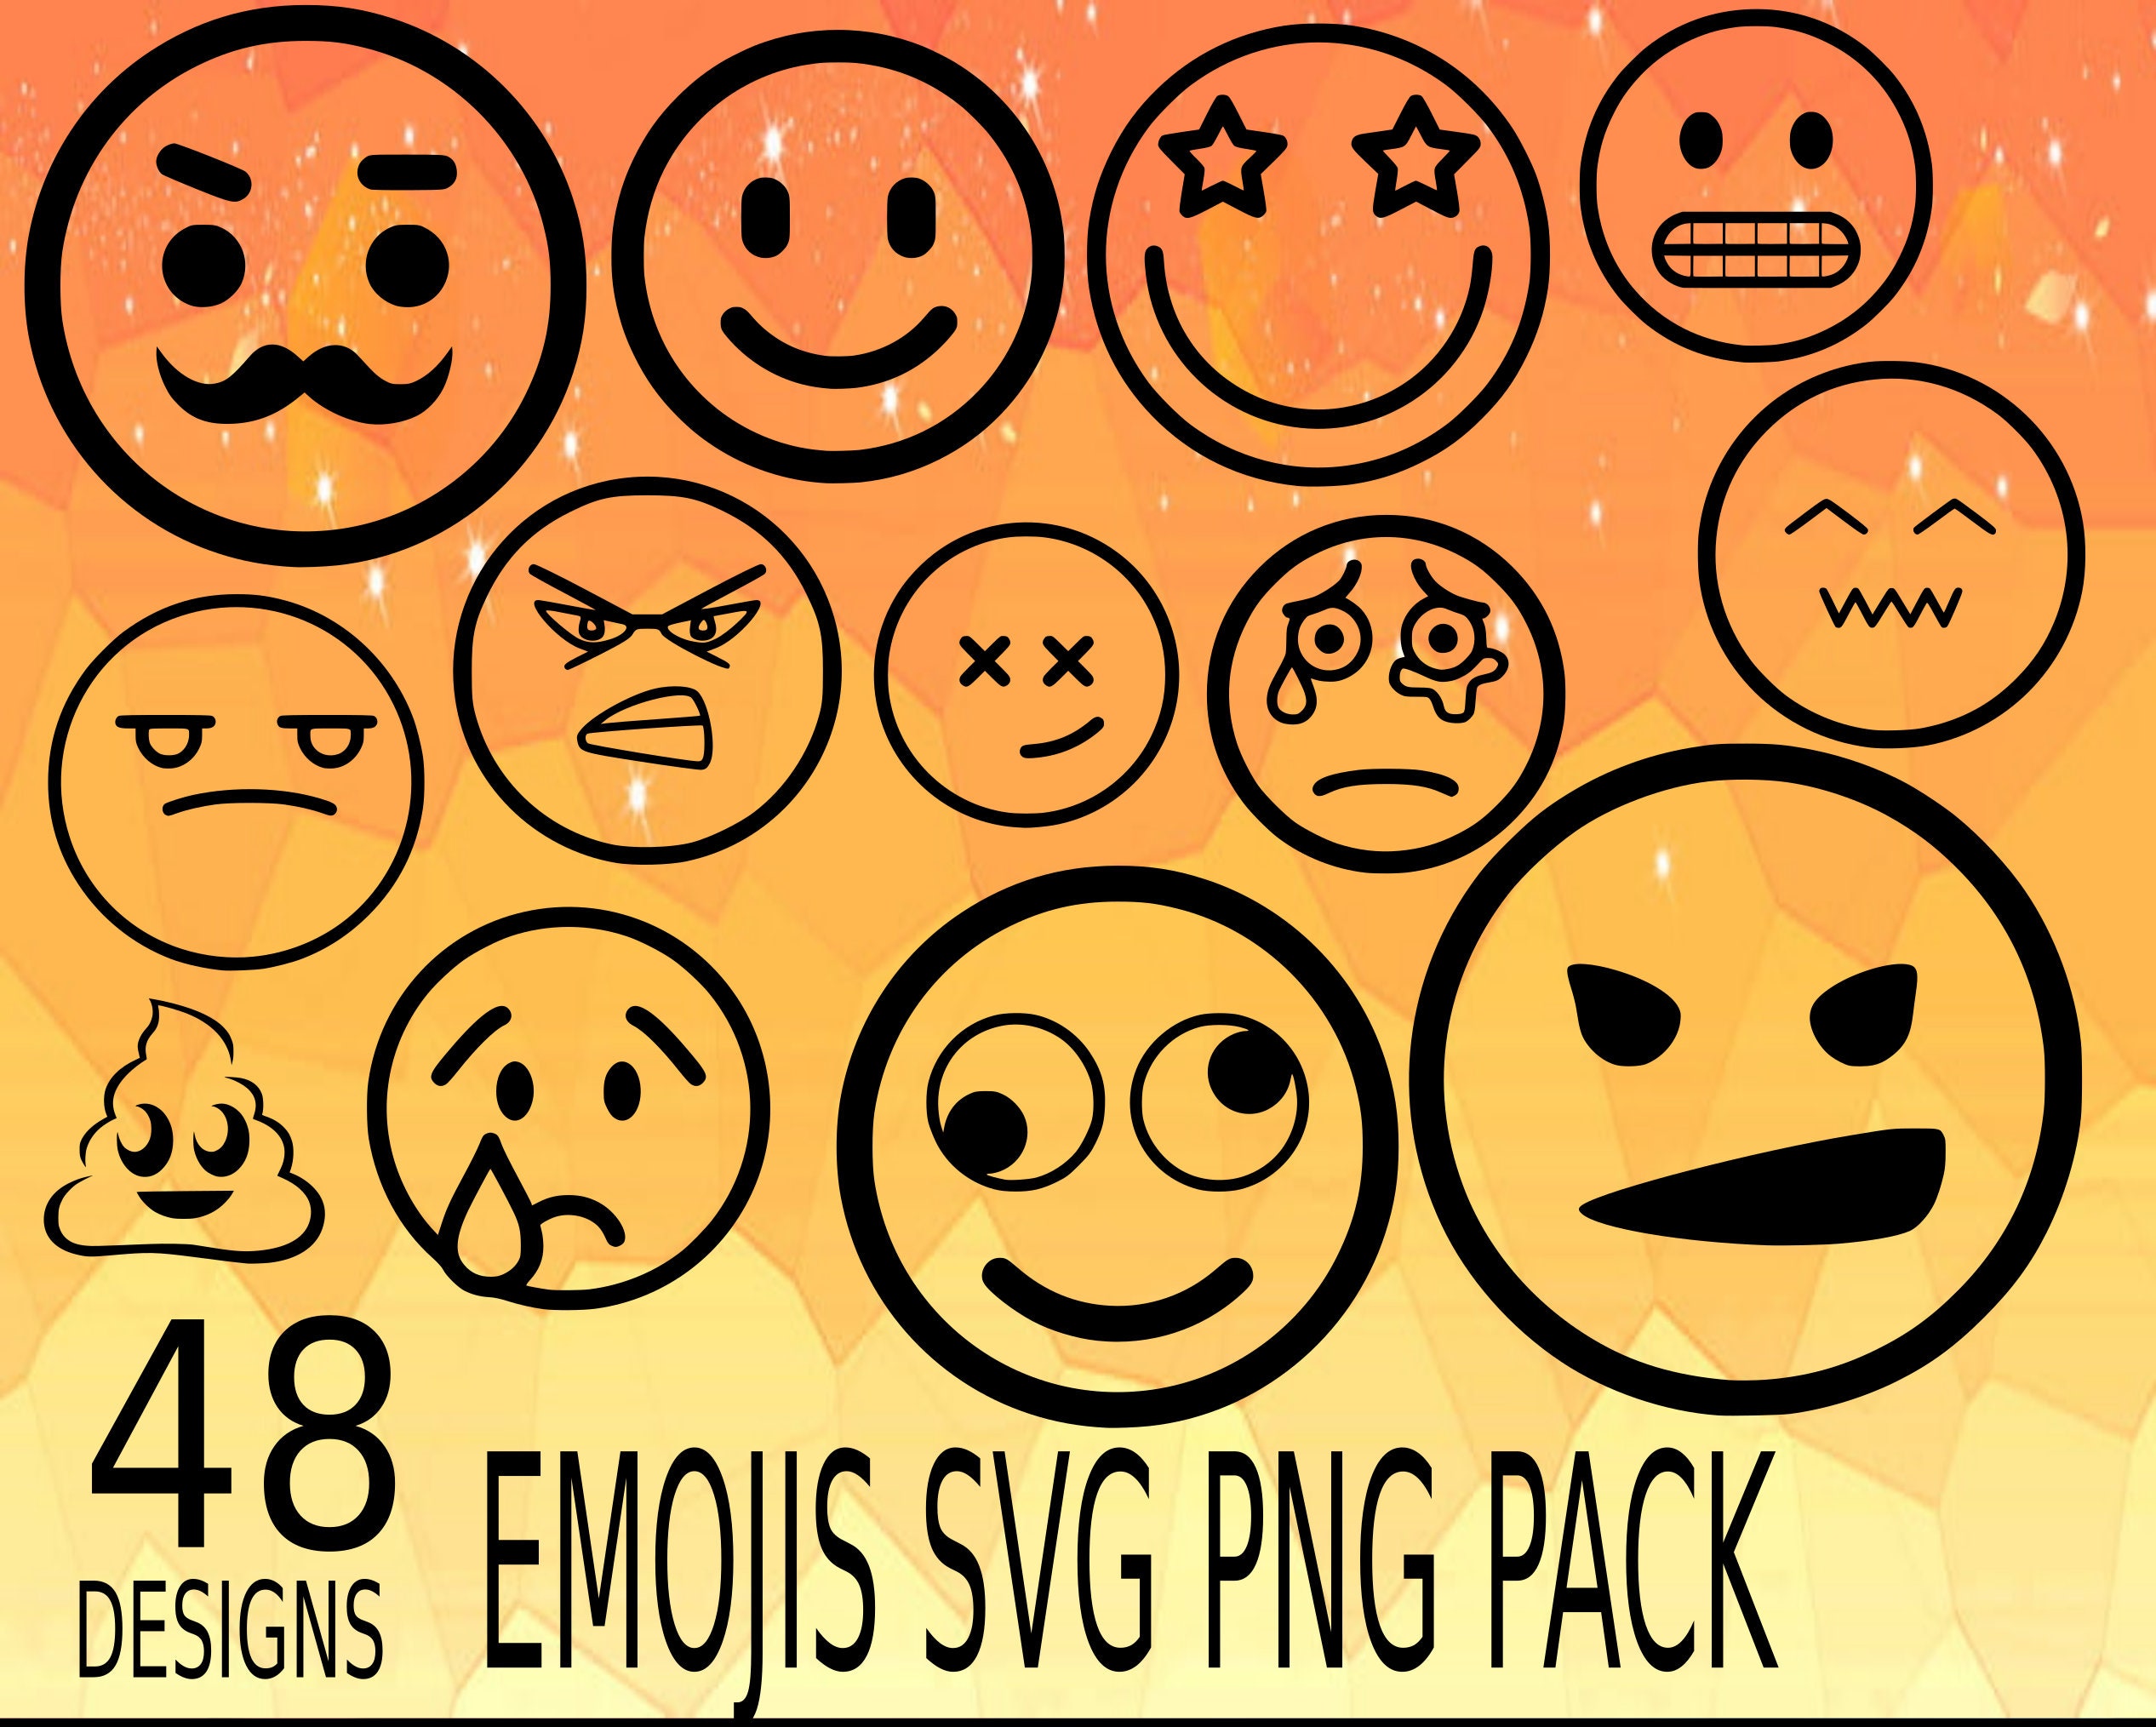 Angry, dislike, emoji, face, meme icon - Download on Iconfinder